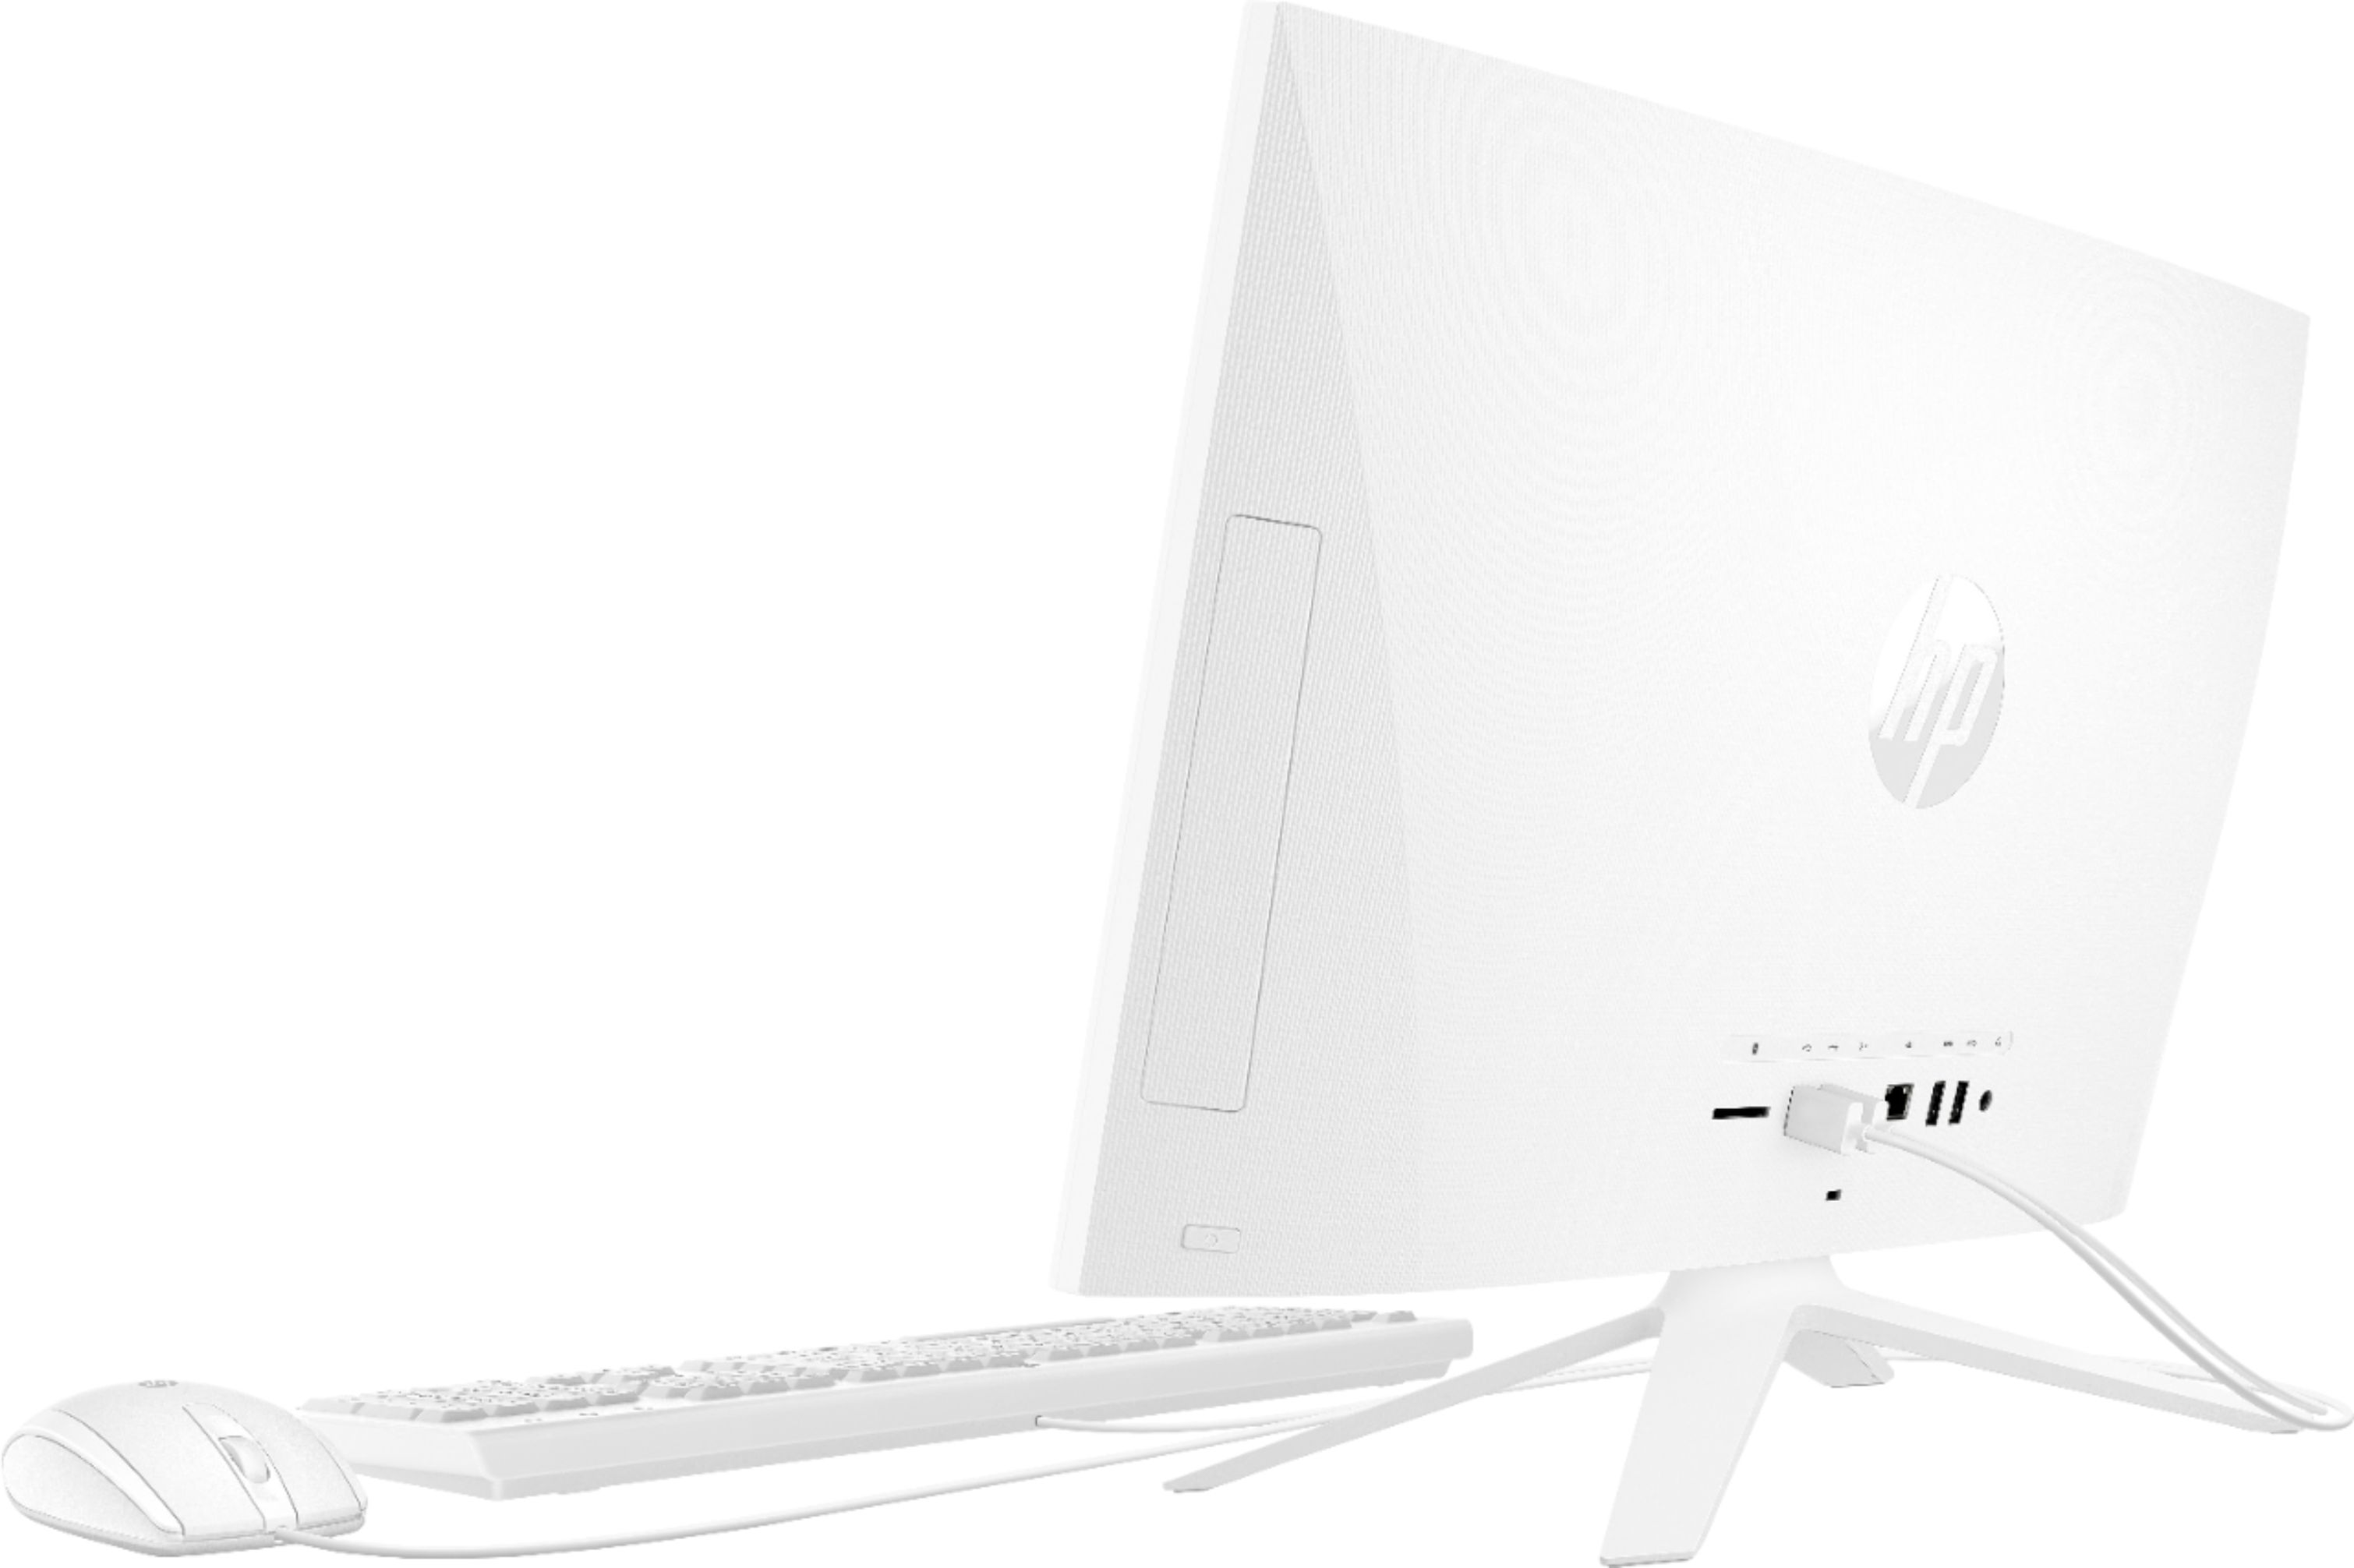 Back View: MSI - PRO 24X 10M 23.8" All-In-One - Intel Pentium Gold - 4 GB Memory - 128 GB SSD - Silver